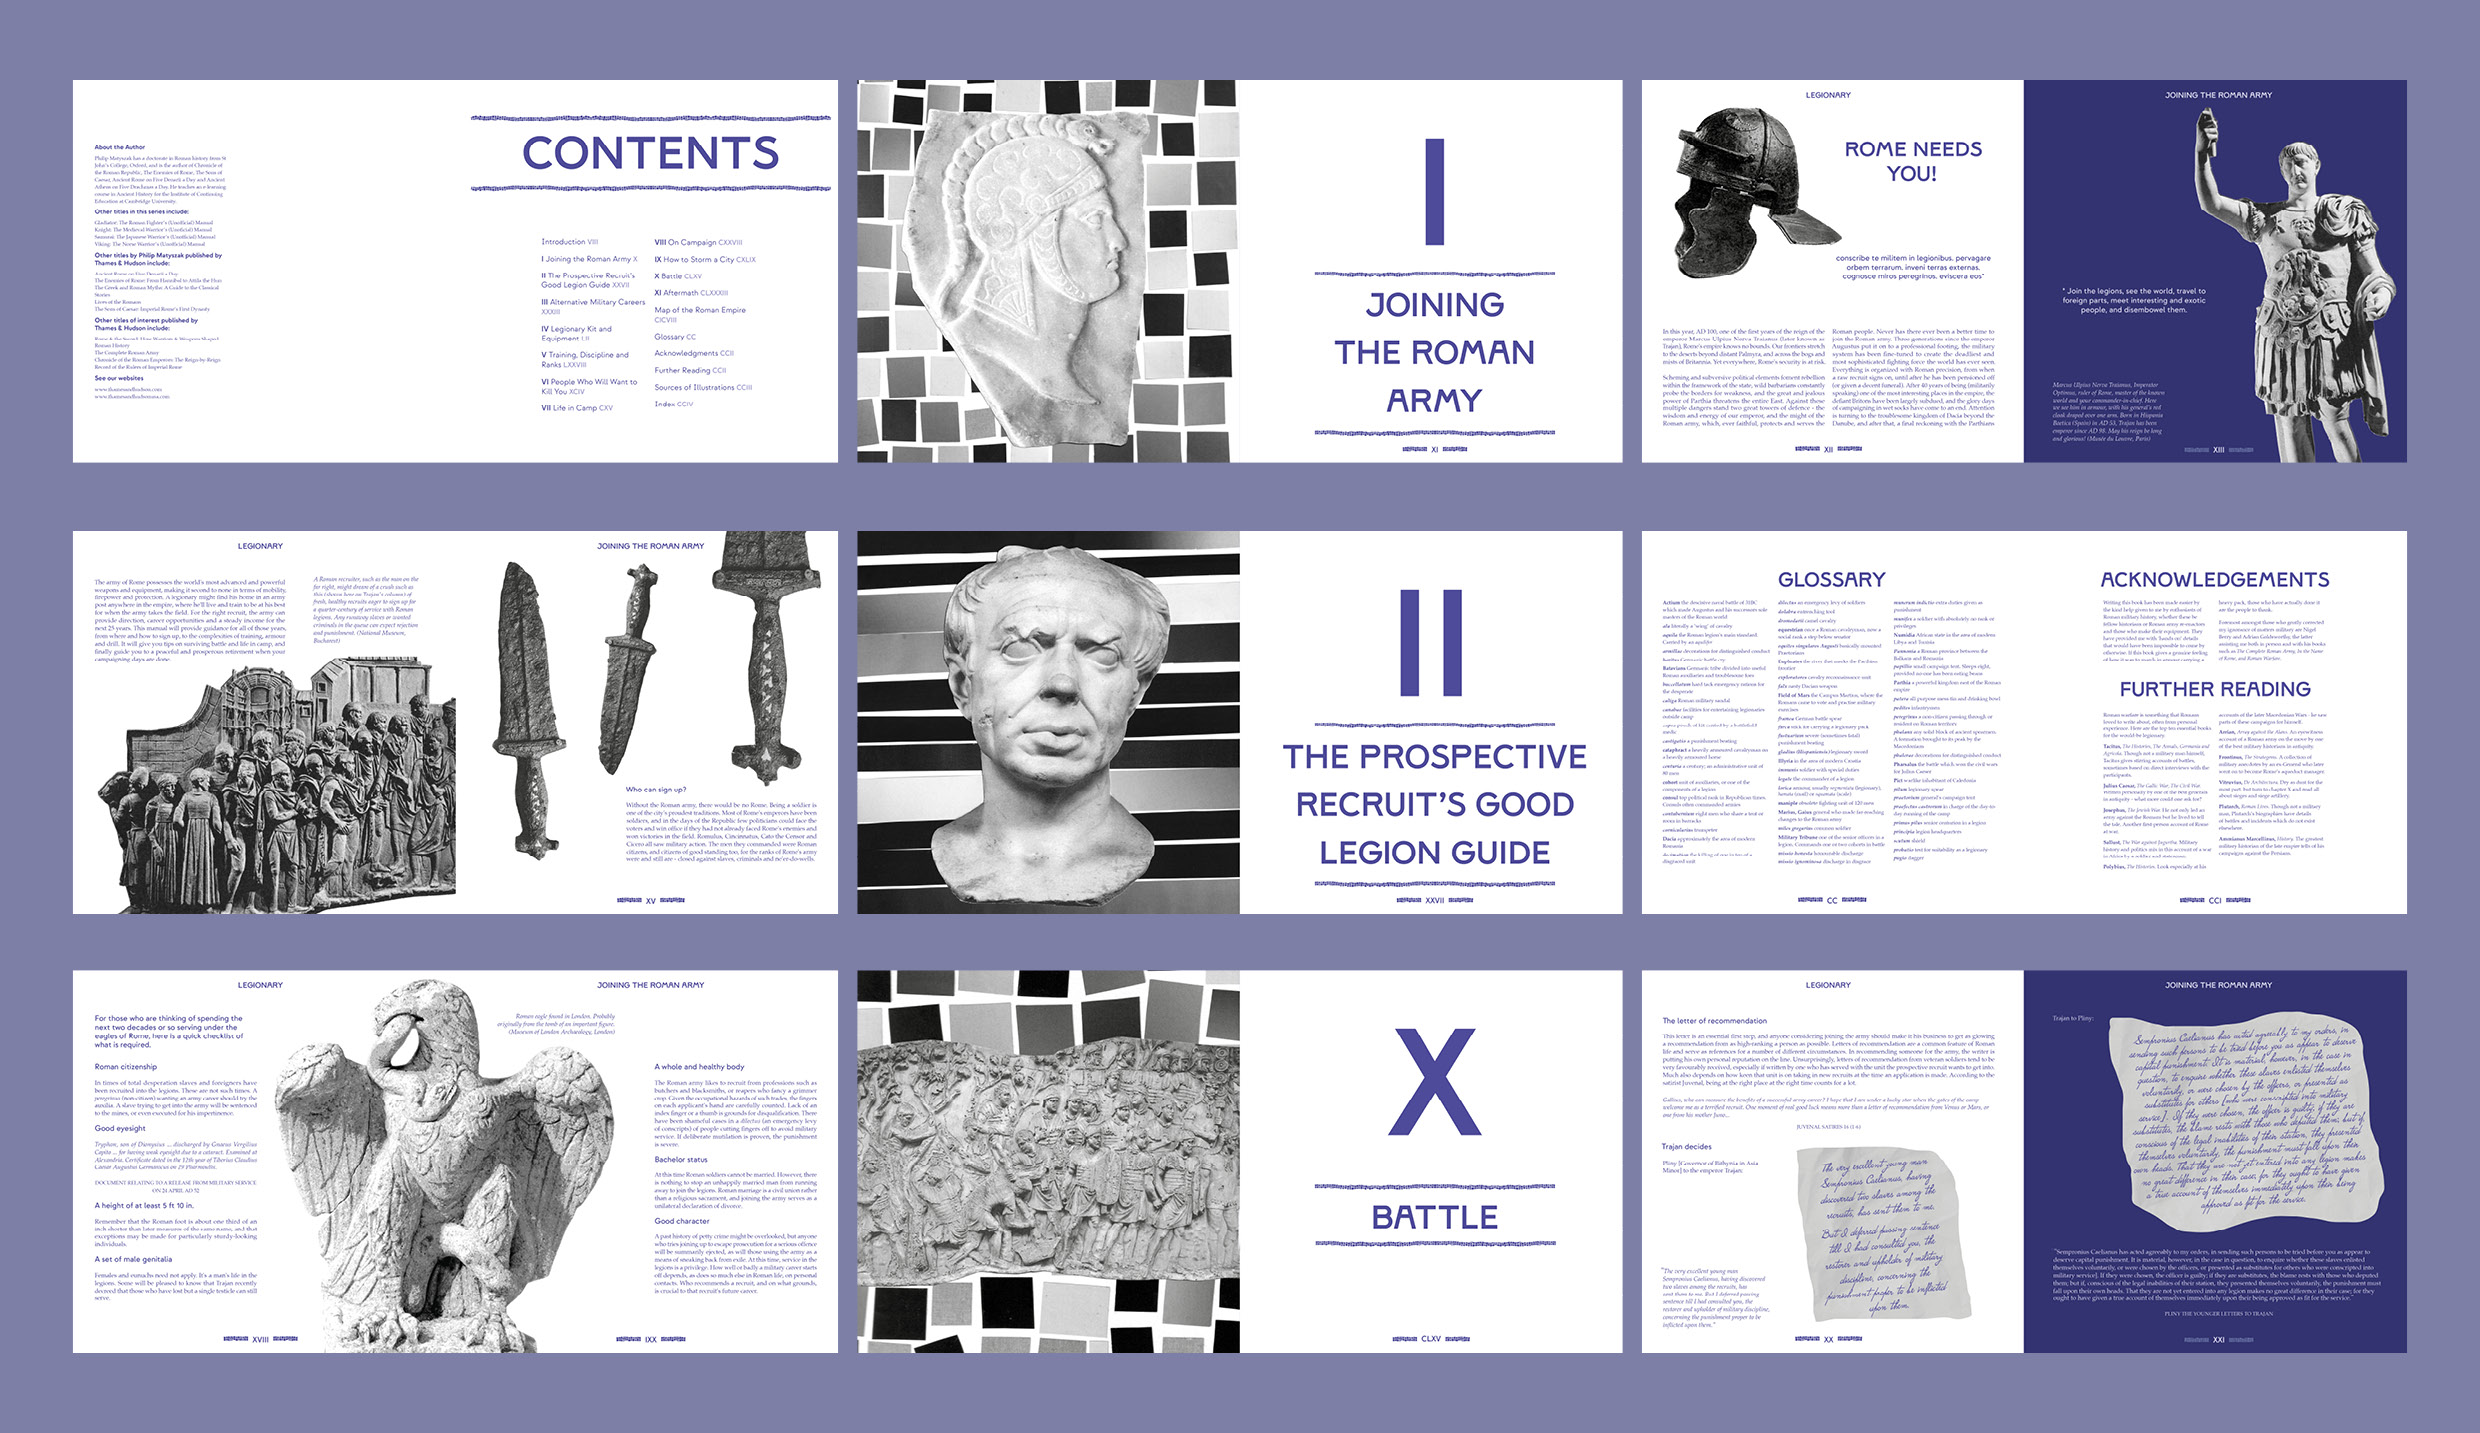 A book layout and design by Jordan Fayers for Legionary: The Roman Soldier's Unofficial Manual by Philip Matyszak. There are several spreads from within the book design.